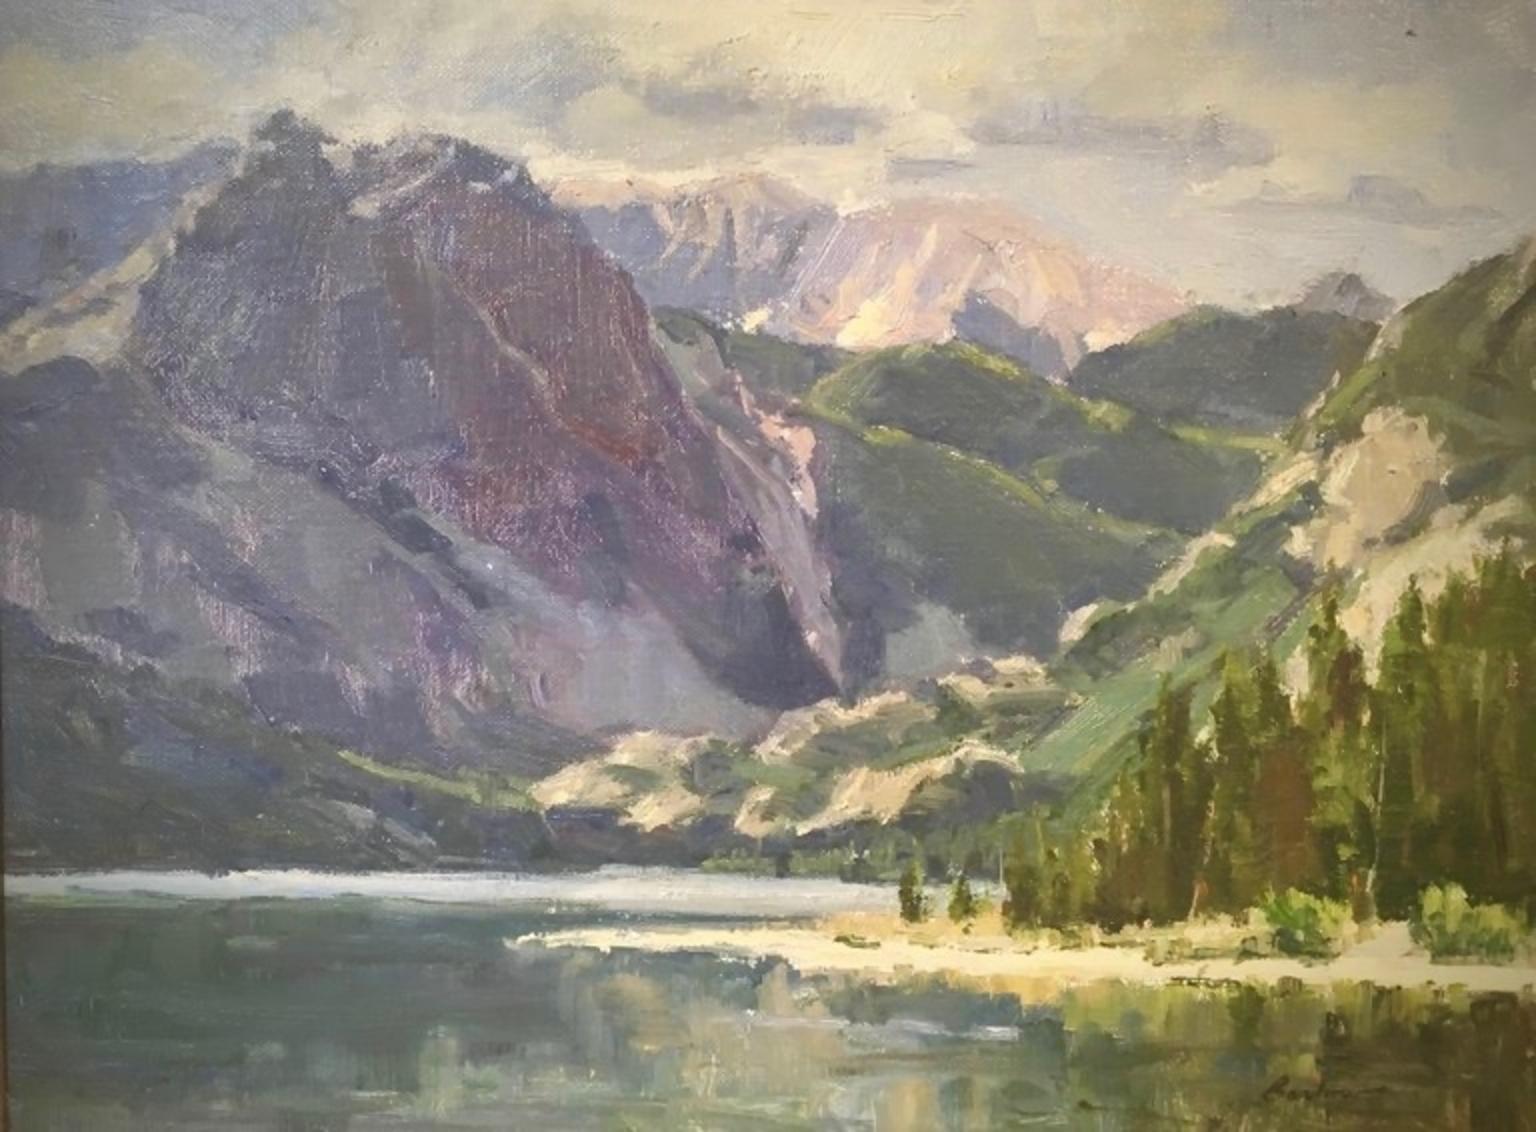 &quot;East Rosebud Lake&quot; by Bob Barlow. Barlow is known for his painterly tributes to wild and pastoral landscapes throughout Montana and Wyoming. This painting is significant because it showcases the lake which serves as the major source for one of America's newest additions to protection under the federal Wild and Scenic Rivers Act. Some 20 miles of East Rosebud Creek passes spectacularly through a stretch of the Absaroka Mountains dubbed &quot;the Alps of Montana.&quot;  It is now protected thanks to bi-partisan support.  For more information on Barlow's work go to www.bobbarlow.com